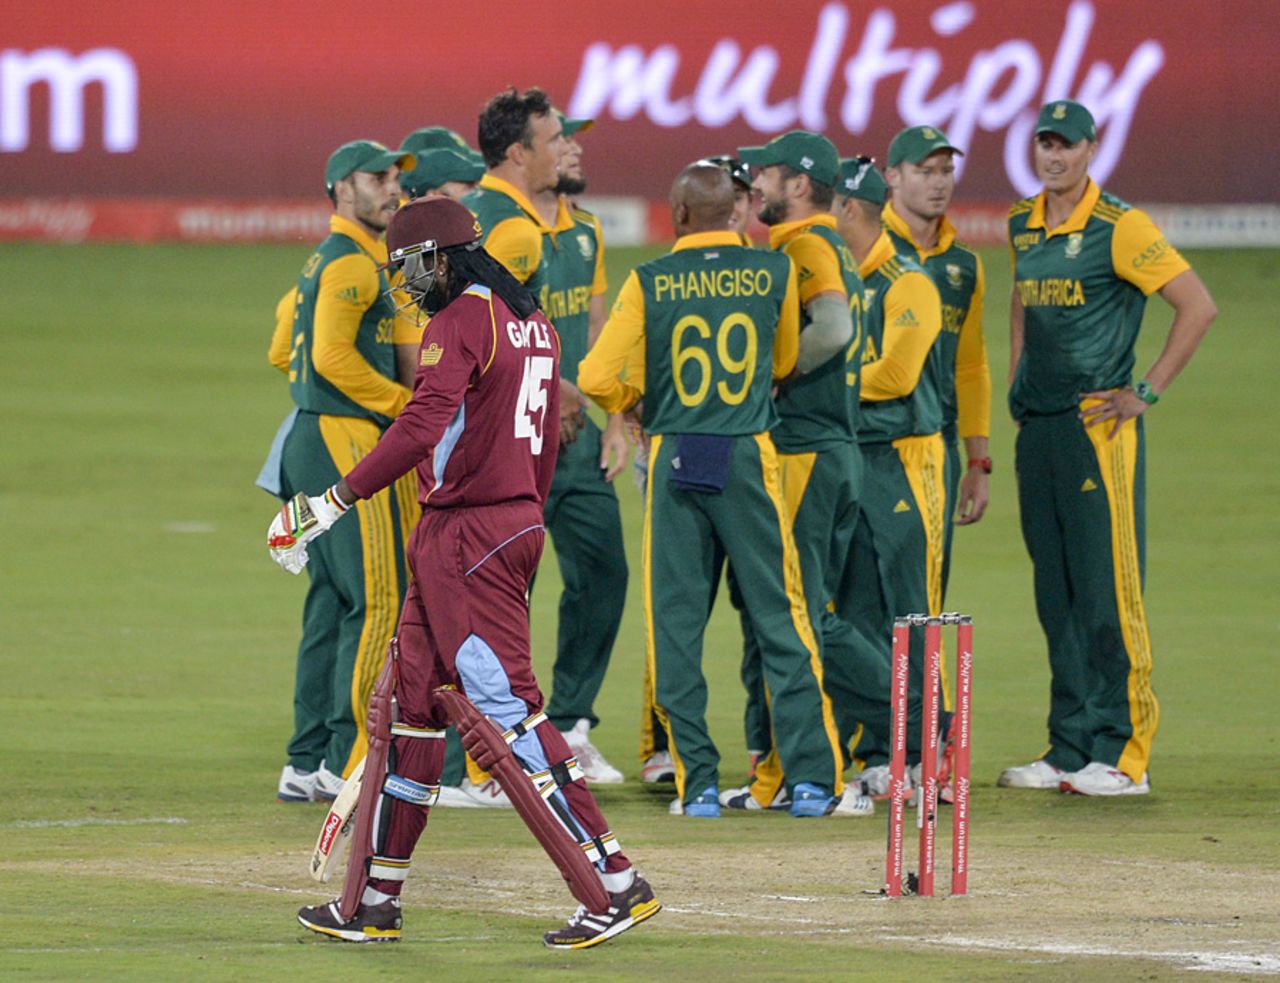 Chris Gayle fell to the first ball of West Indies' reply, South Africa v West Indies, 5th ODI, Centurion, January 28, 2015